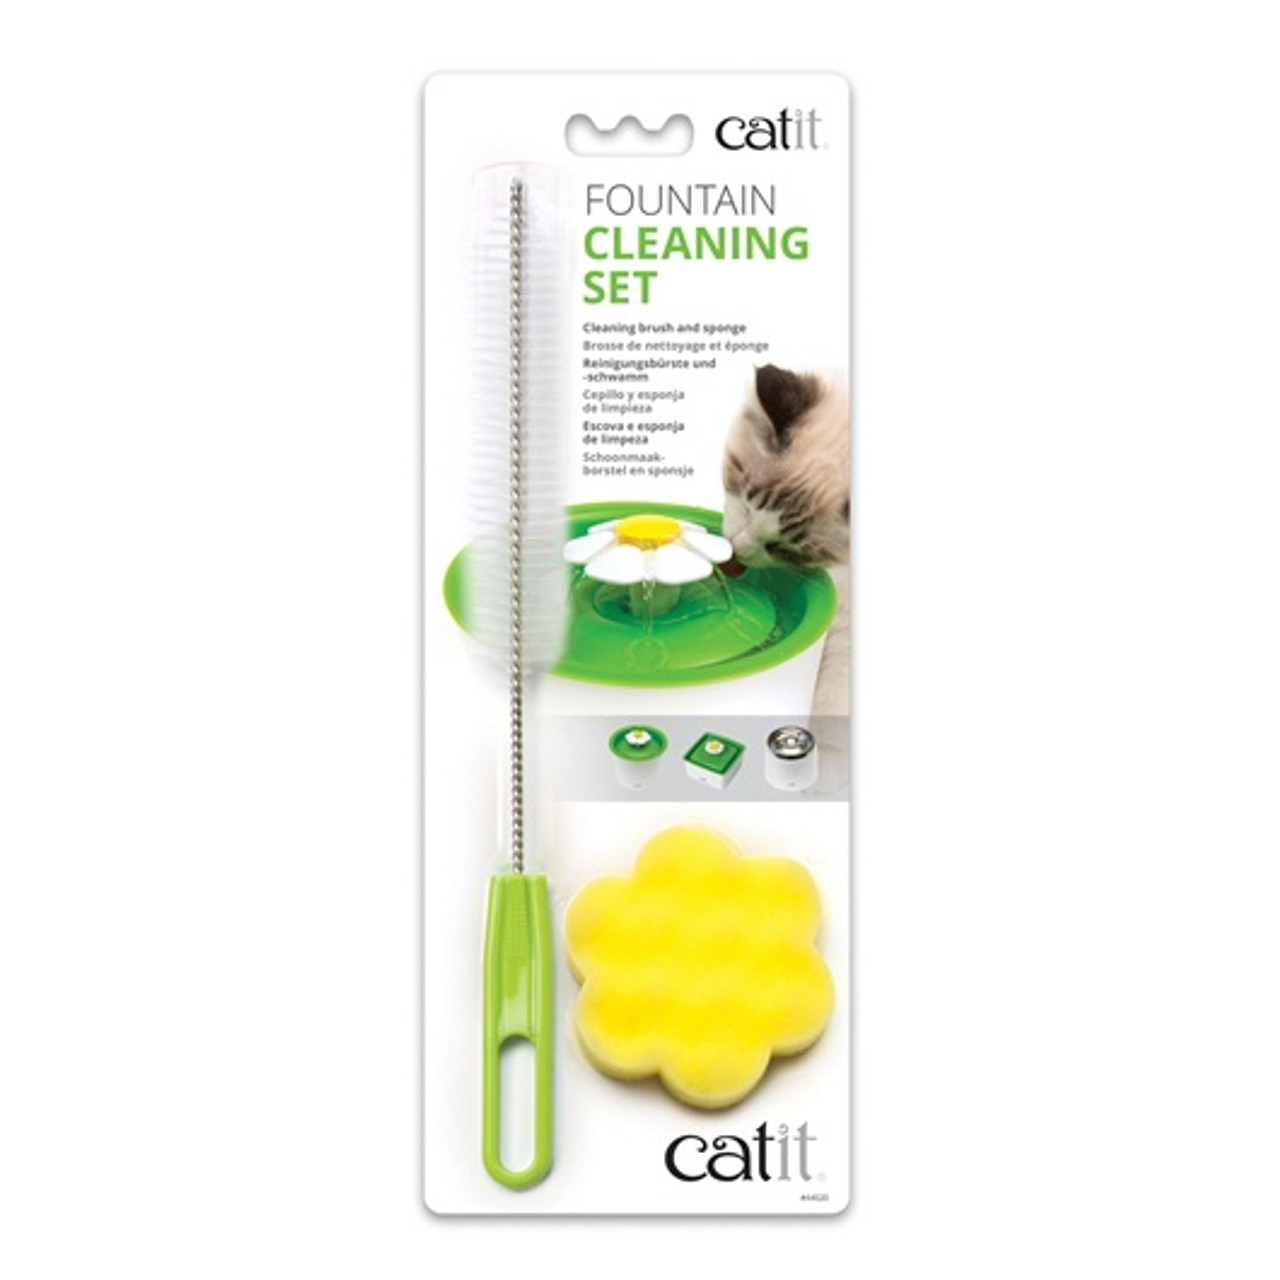 catit flower fountain pump cleaning